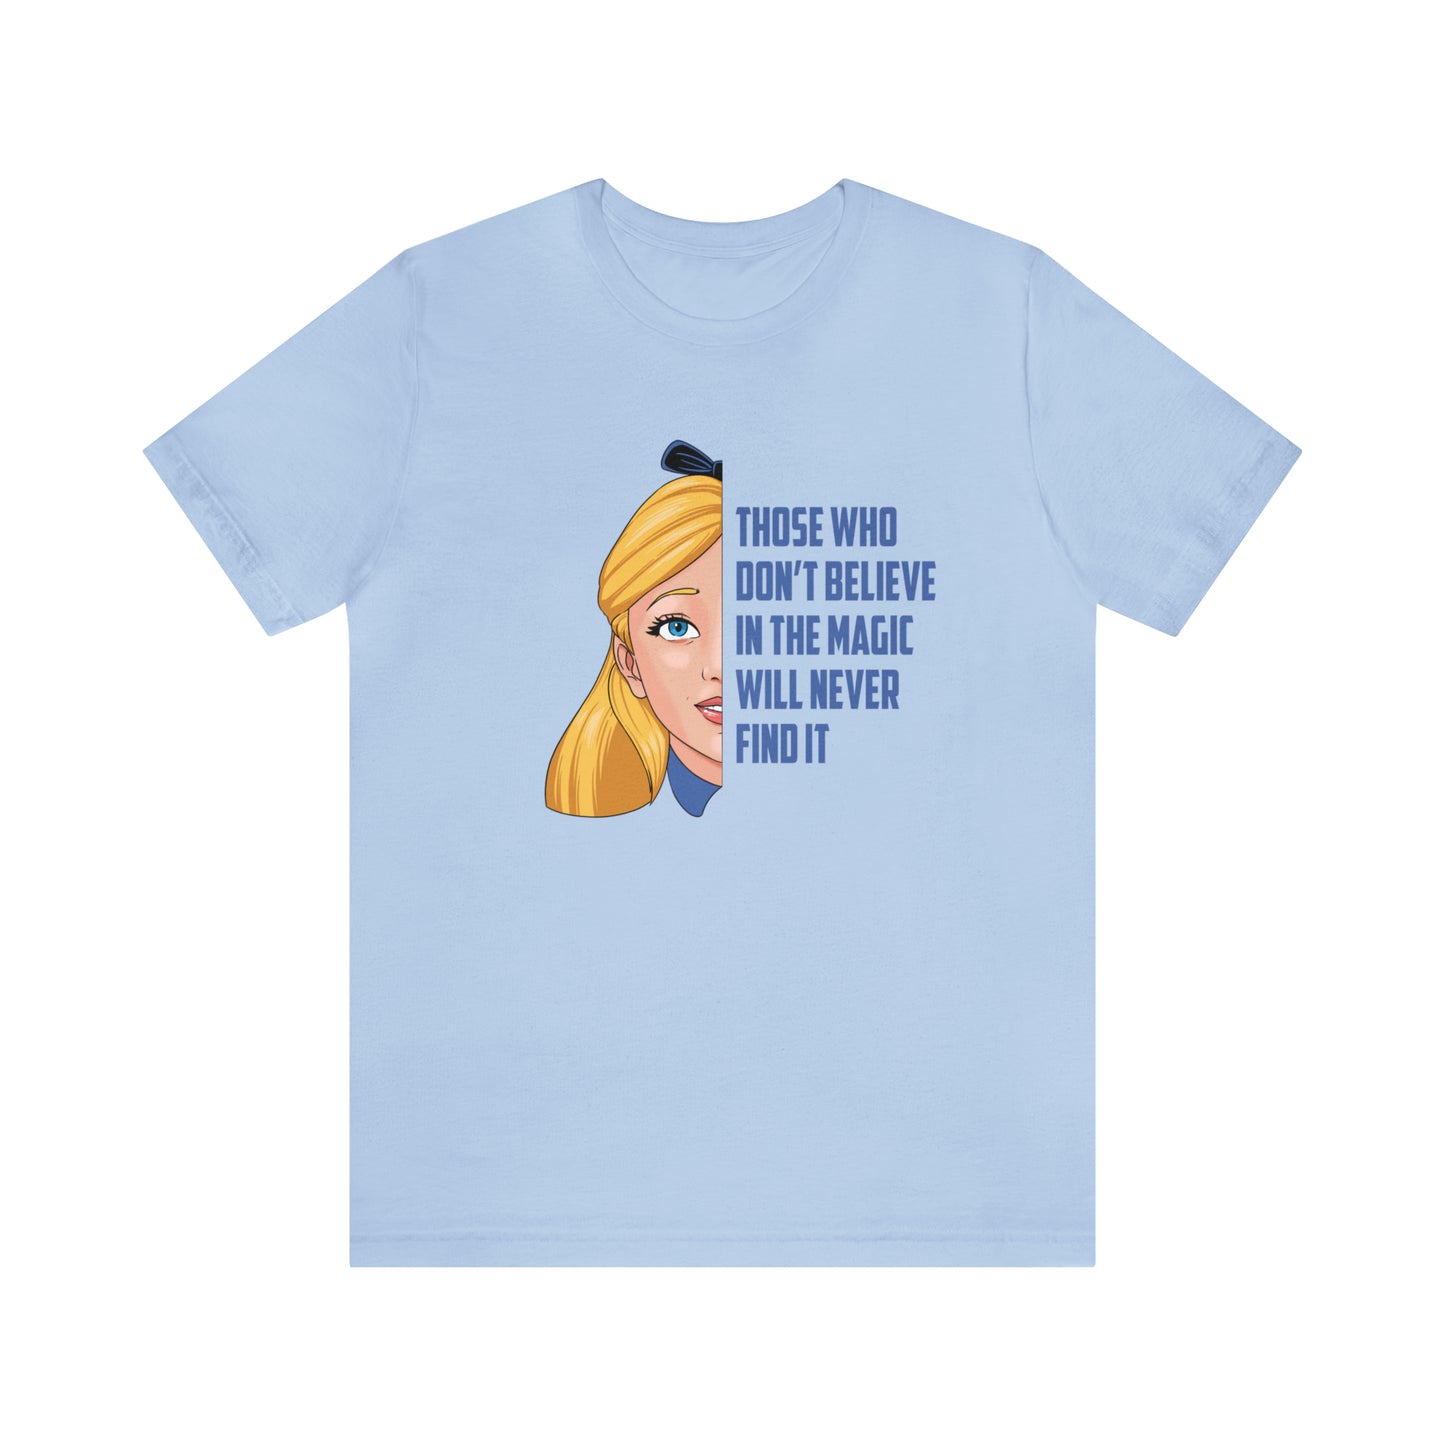 Alice in Wonderland Quote - Those Who Don't Believe in the Magic Will Never Find It - Adult Unisex TShirt